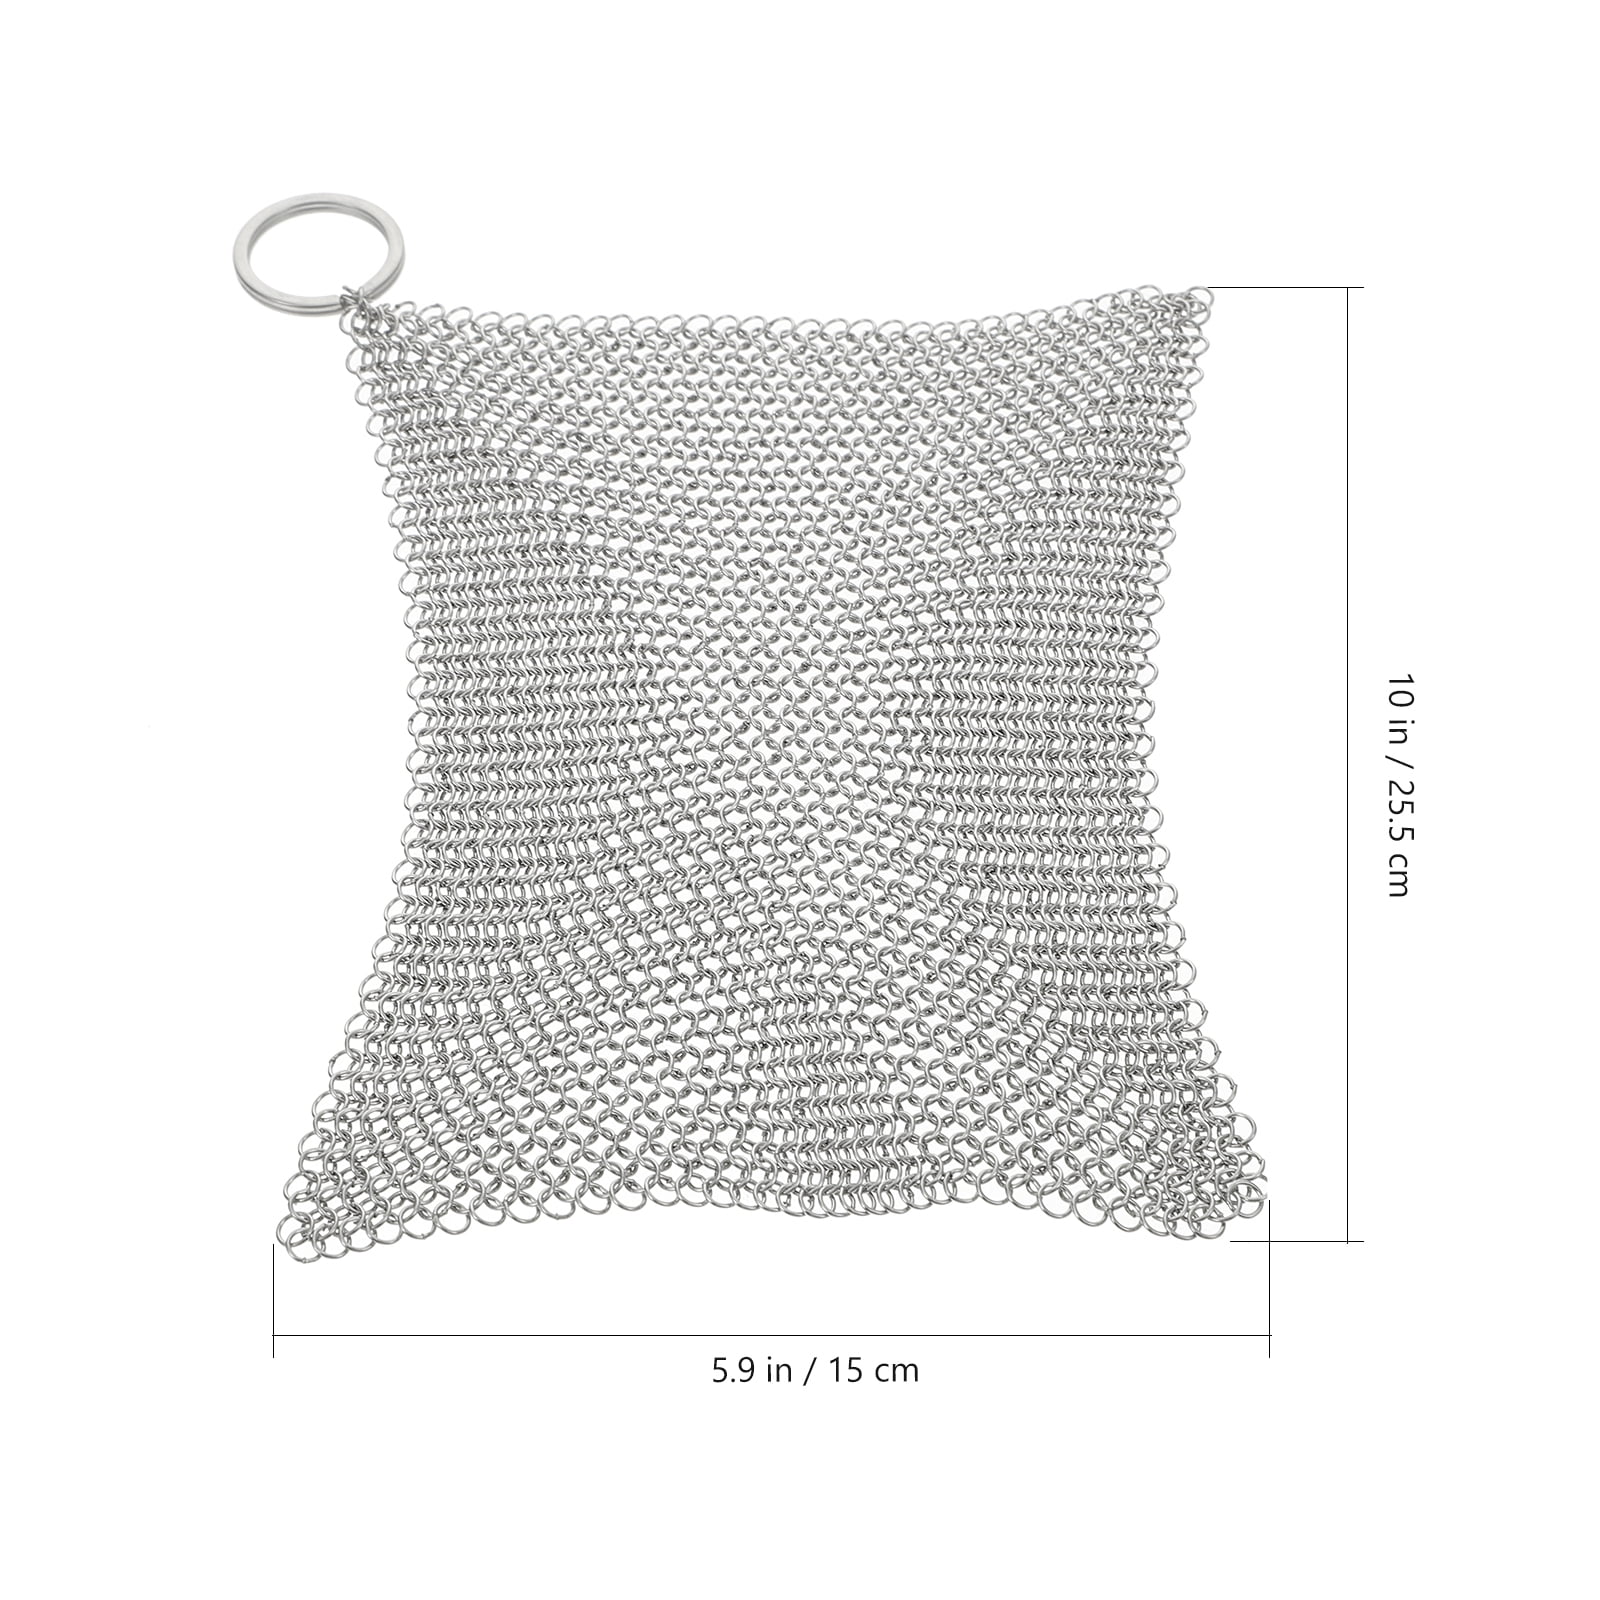 Bruntmor 18/10, 8 x 8 304 Stainless Steel Chainmail Scrubber, for Cast  Iron Pans and Pots and More Cookware